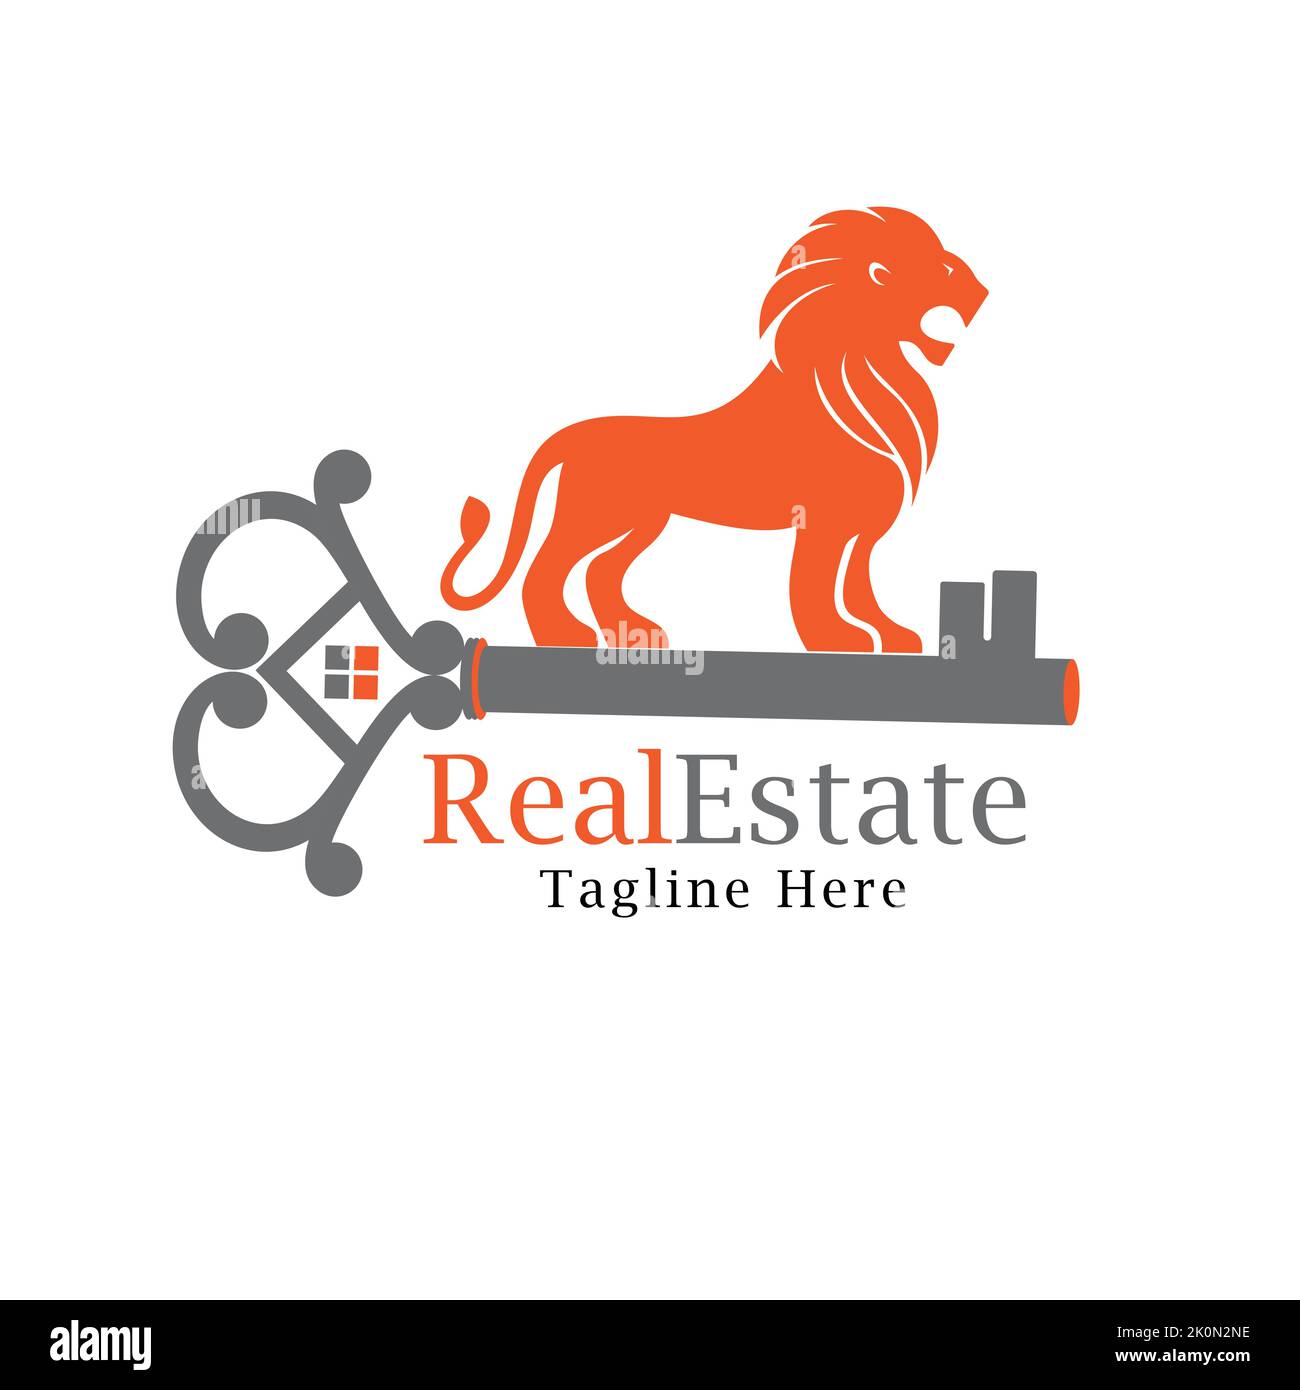 real estate logo with house lion and key elements, property logo ,lion kingdom logo Stock Vector